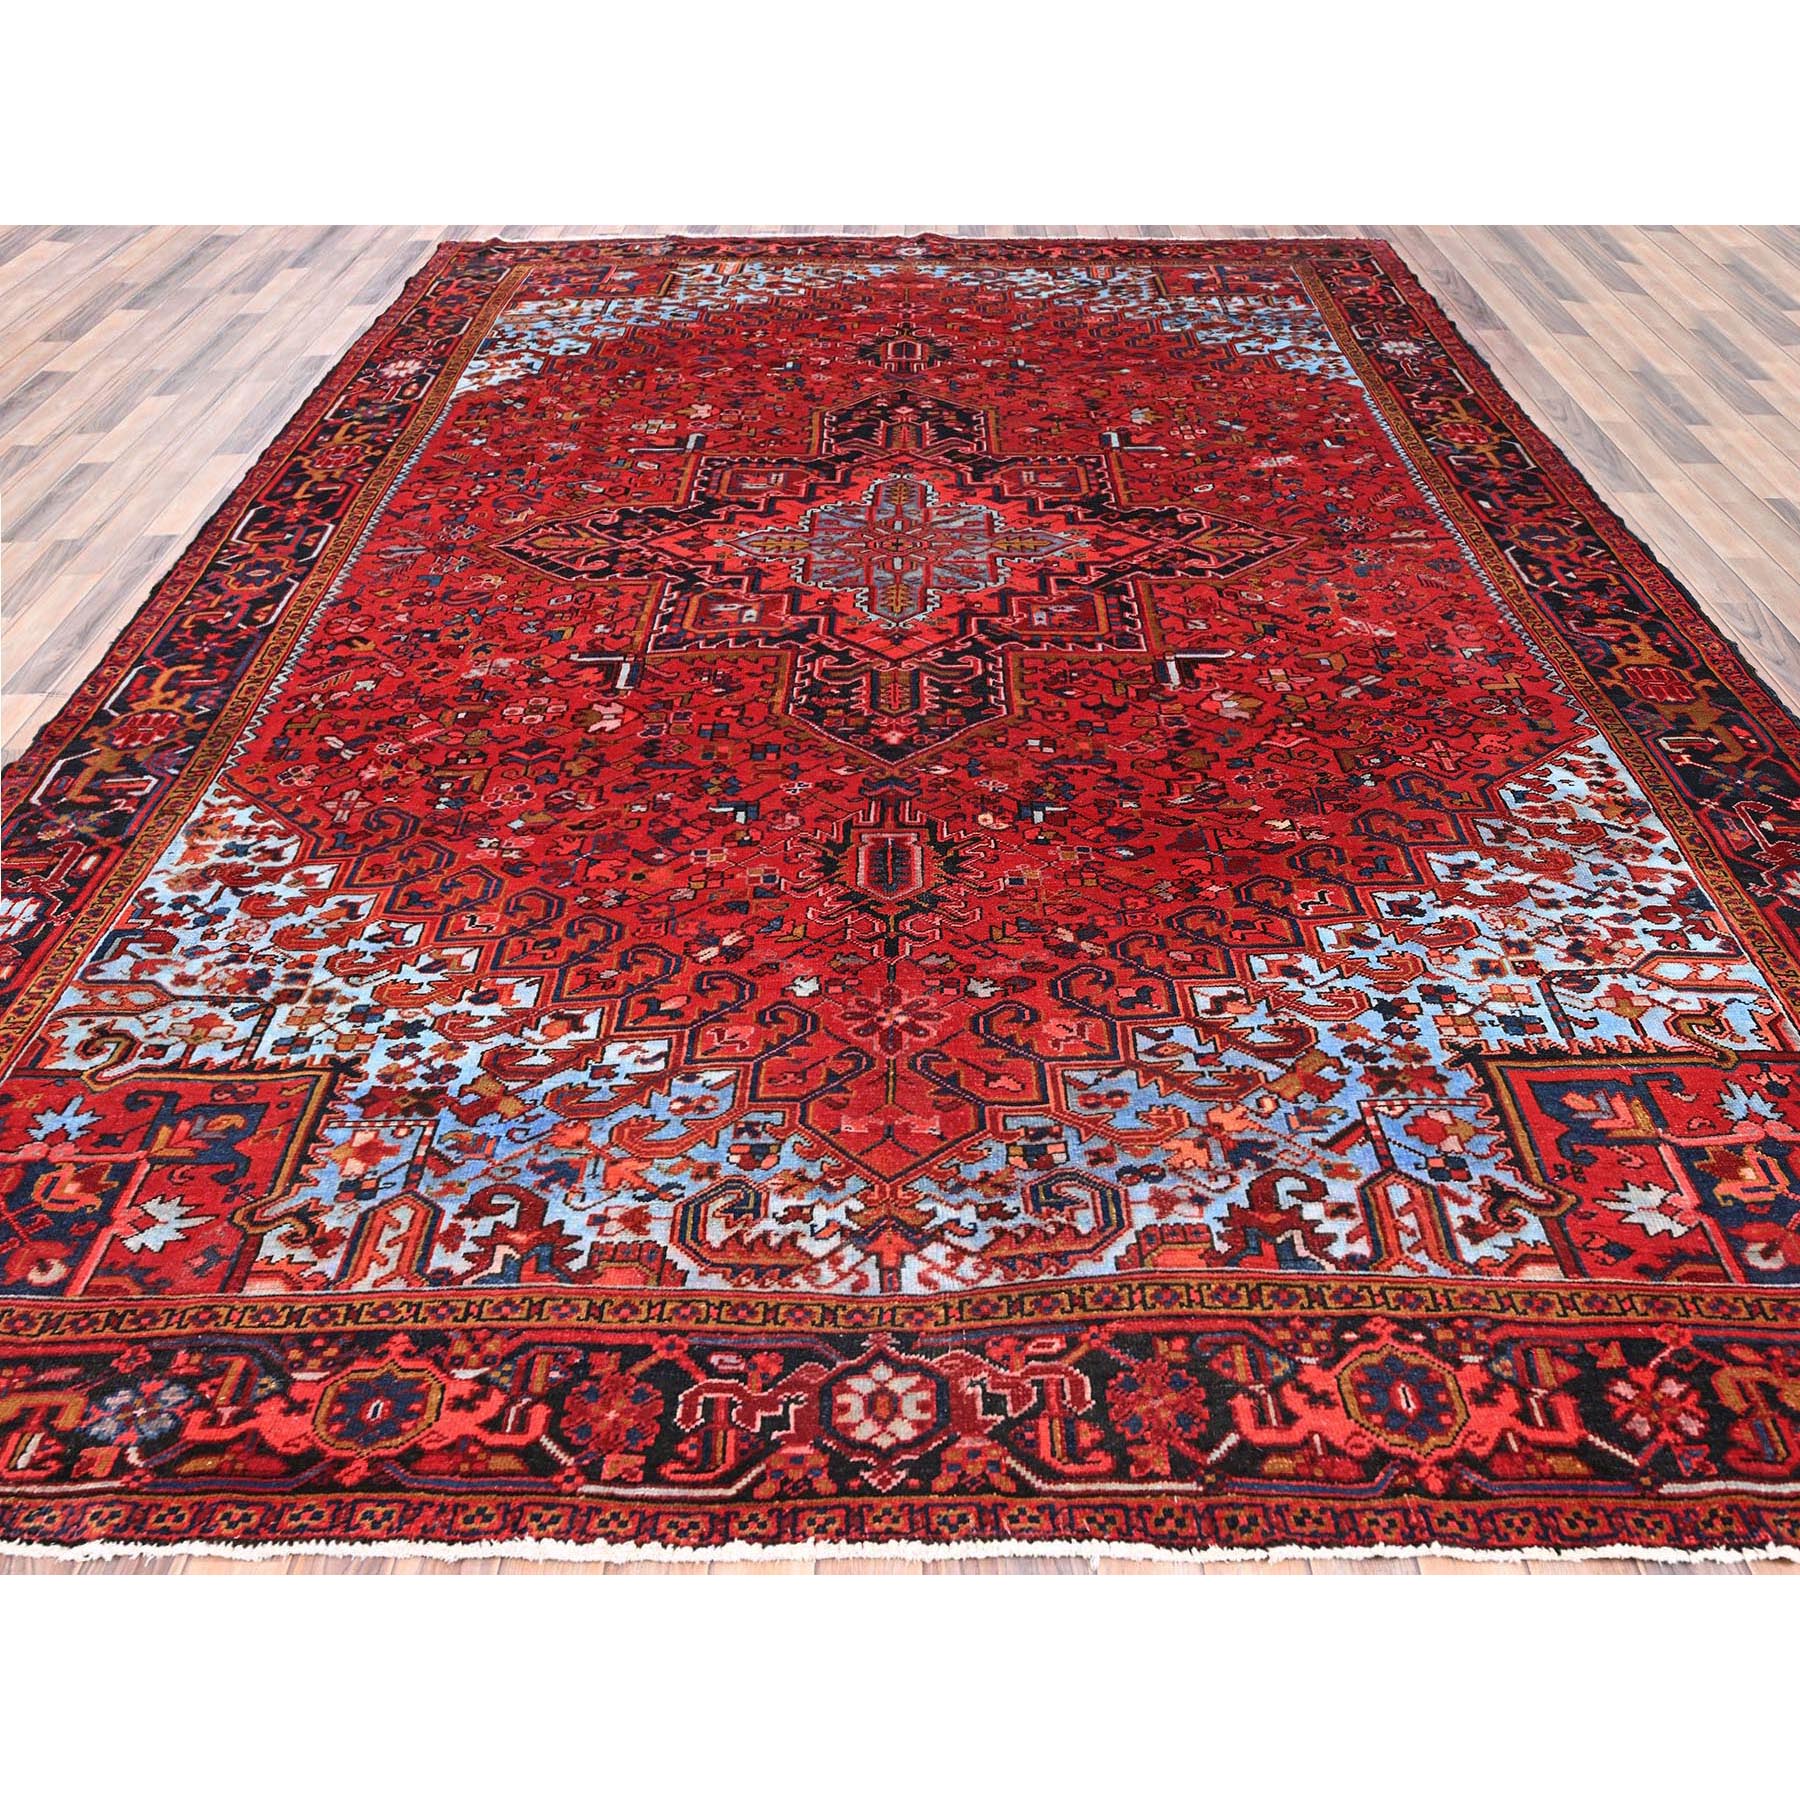 9'7"x13' Imperial Red, Pure Wool, Hand Woven, Vintage Persian Heriz, Good Condition, Distressed Feel, Evenly Worn, Oriental Rug 